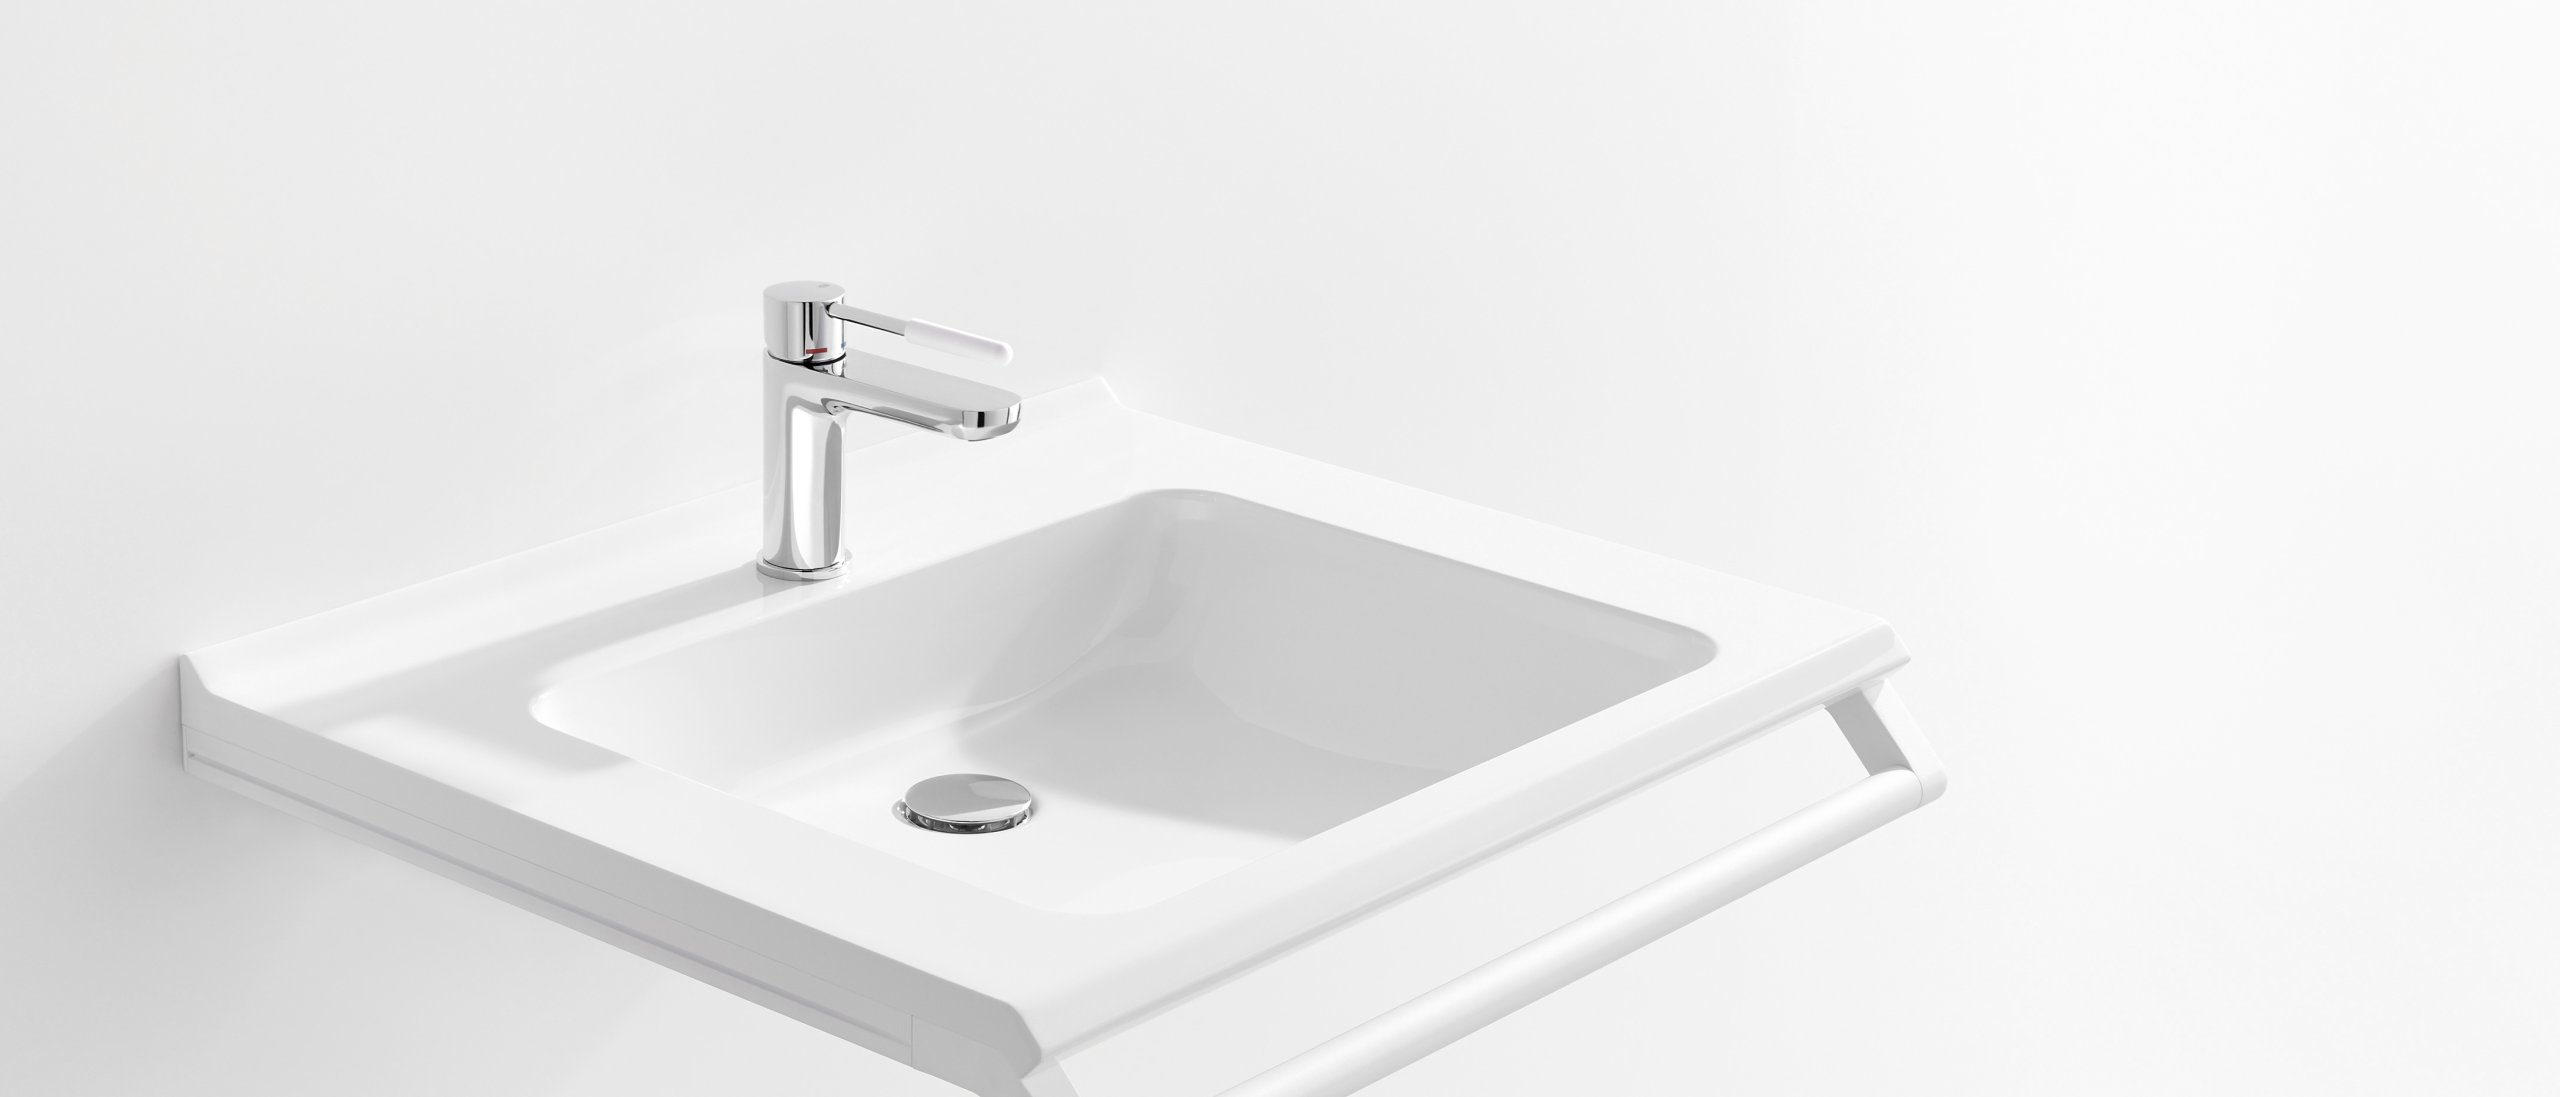 Barrier-free washbasin with grab rail in matt white stainless steel and chrome single-lever tap with white polyamide handle element